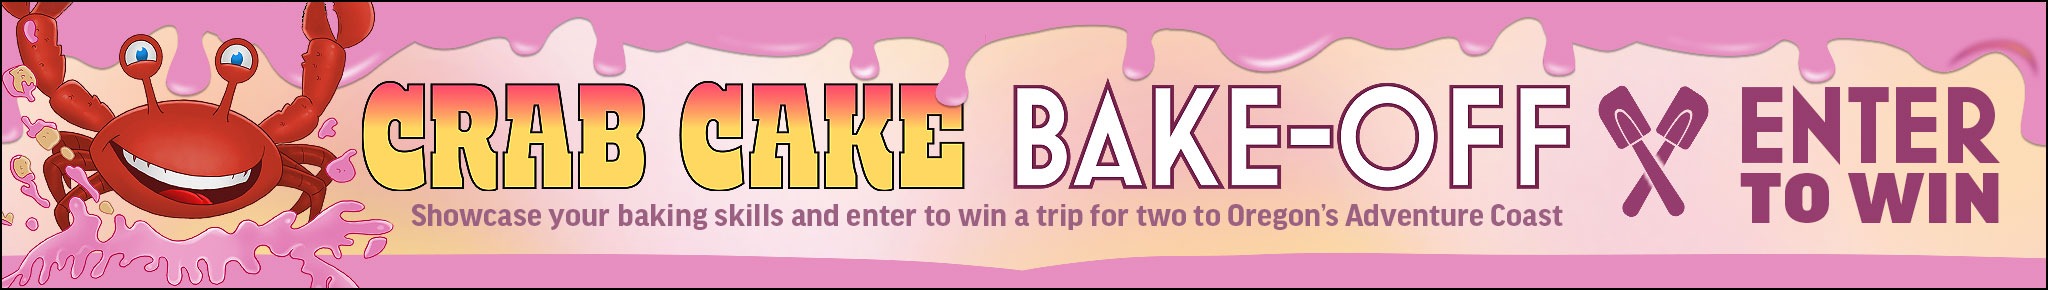 crab bake bake off contest enter to win a trip for two to Oregon's adventure coast